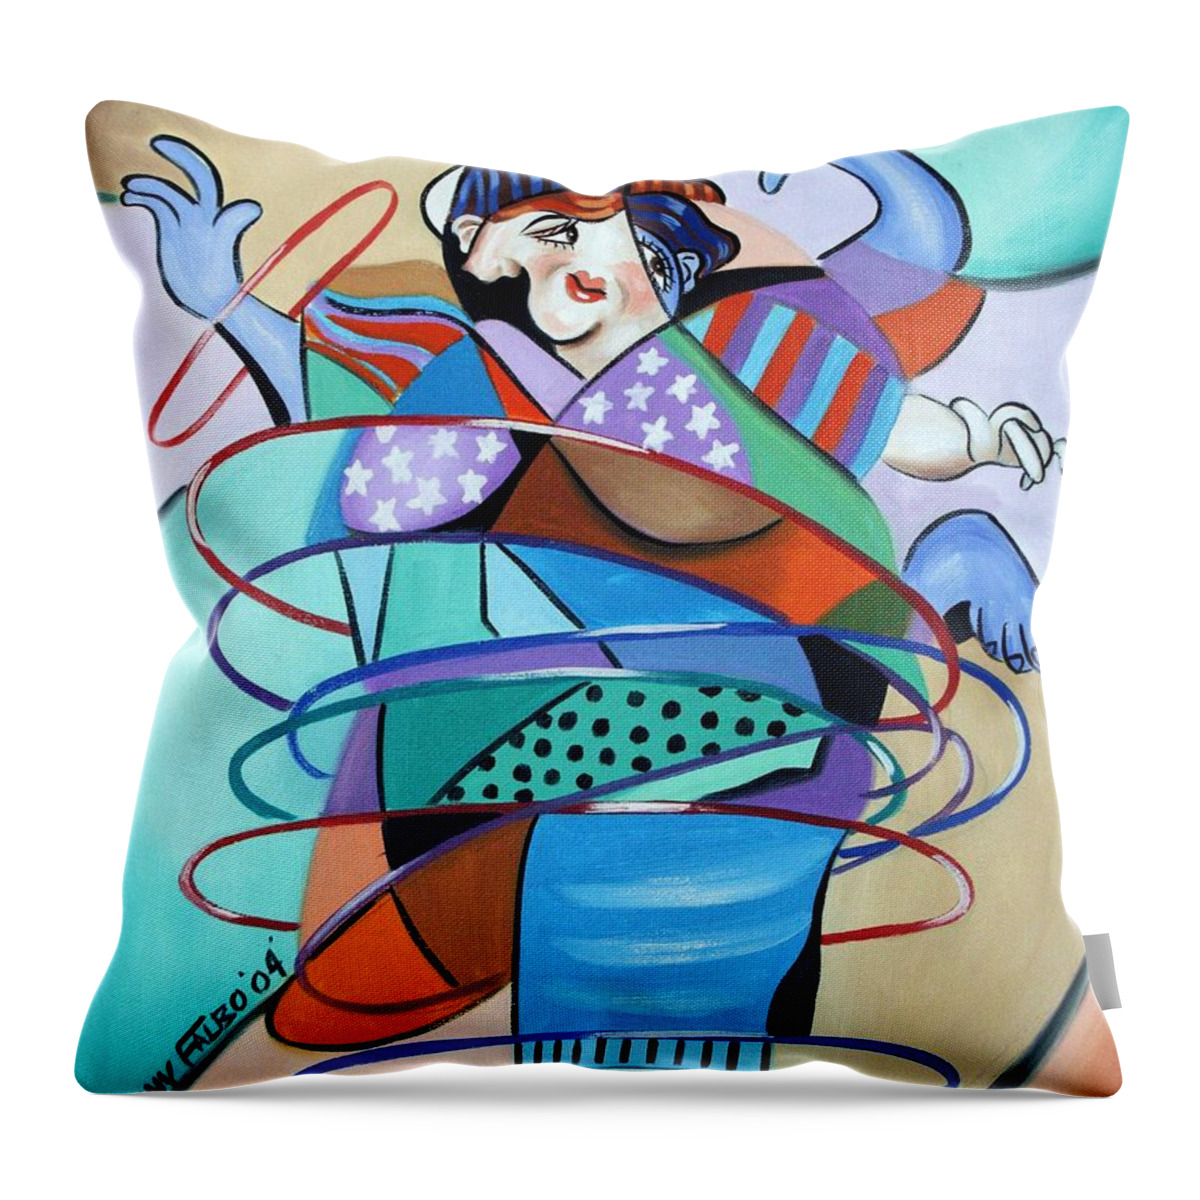 Color In Motion Throw Pillow featuring the painting Color In Motion by Anthony Falbo